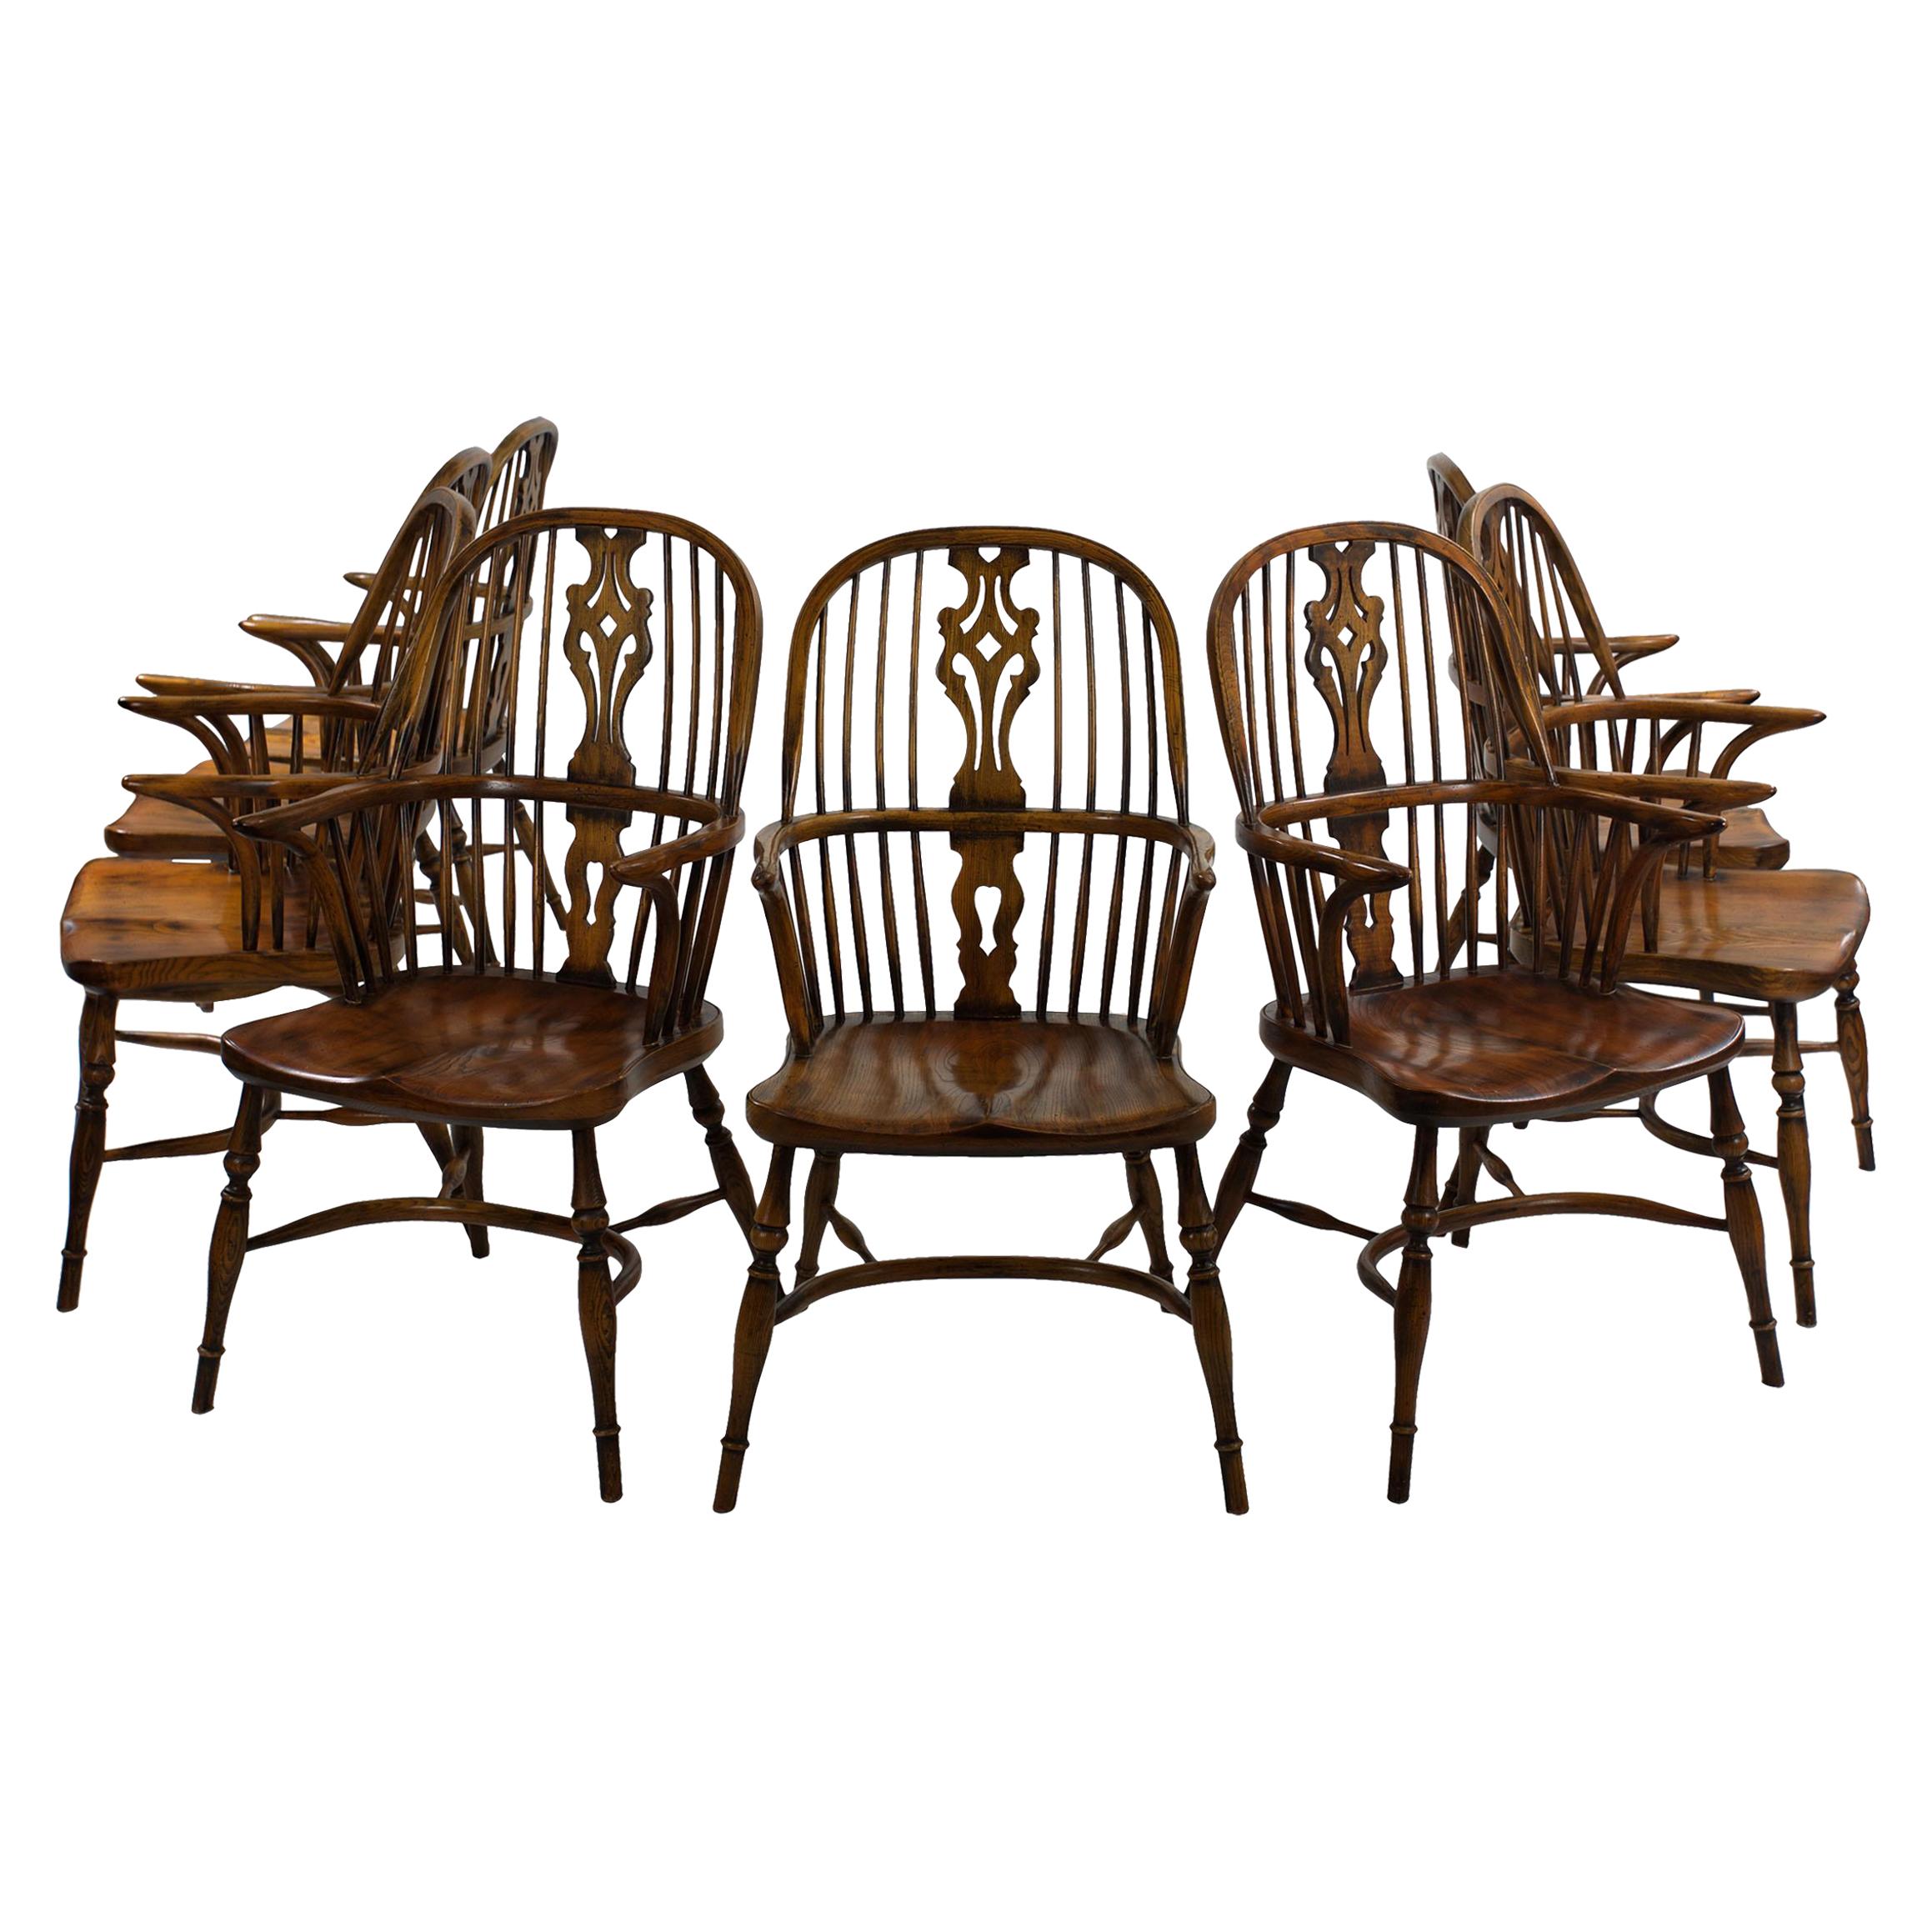 Set of Eight Vintage English Windsor Style Dining Arm Chairs, 20th Century